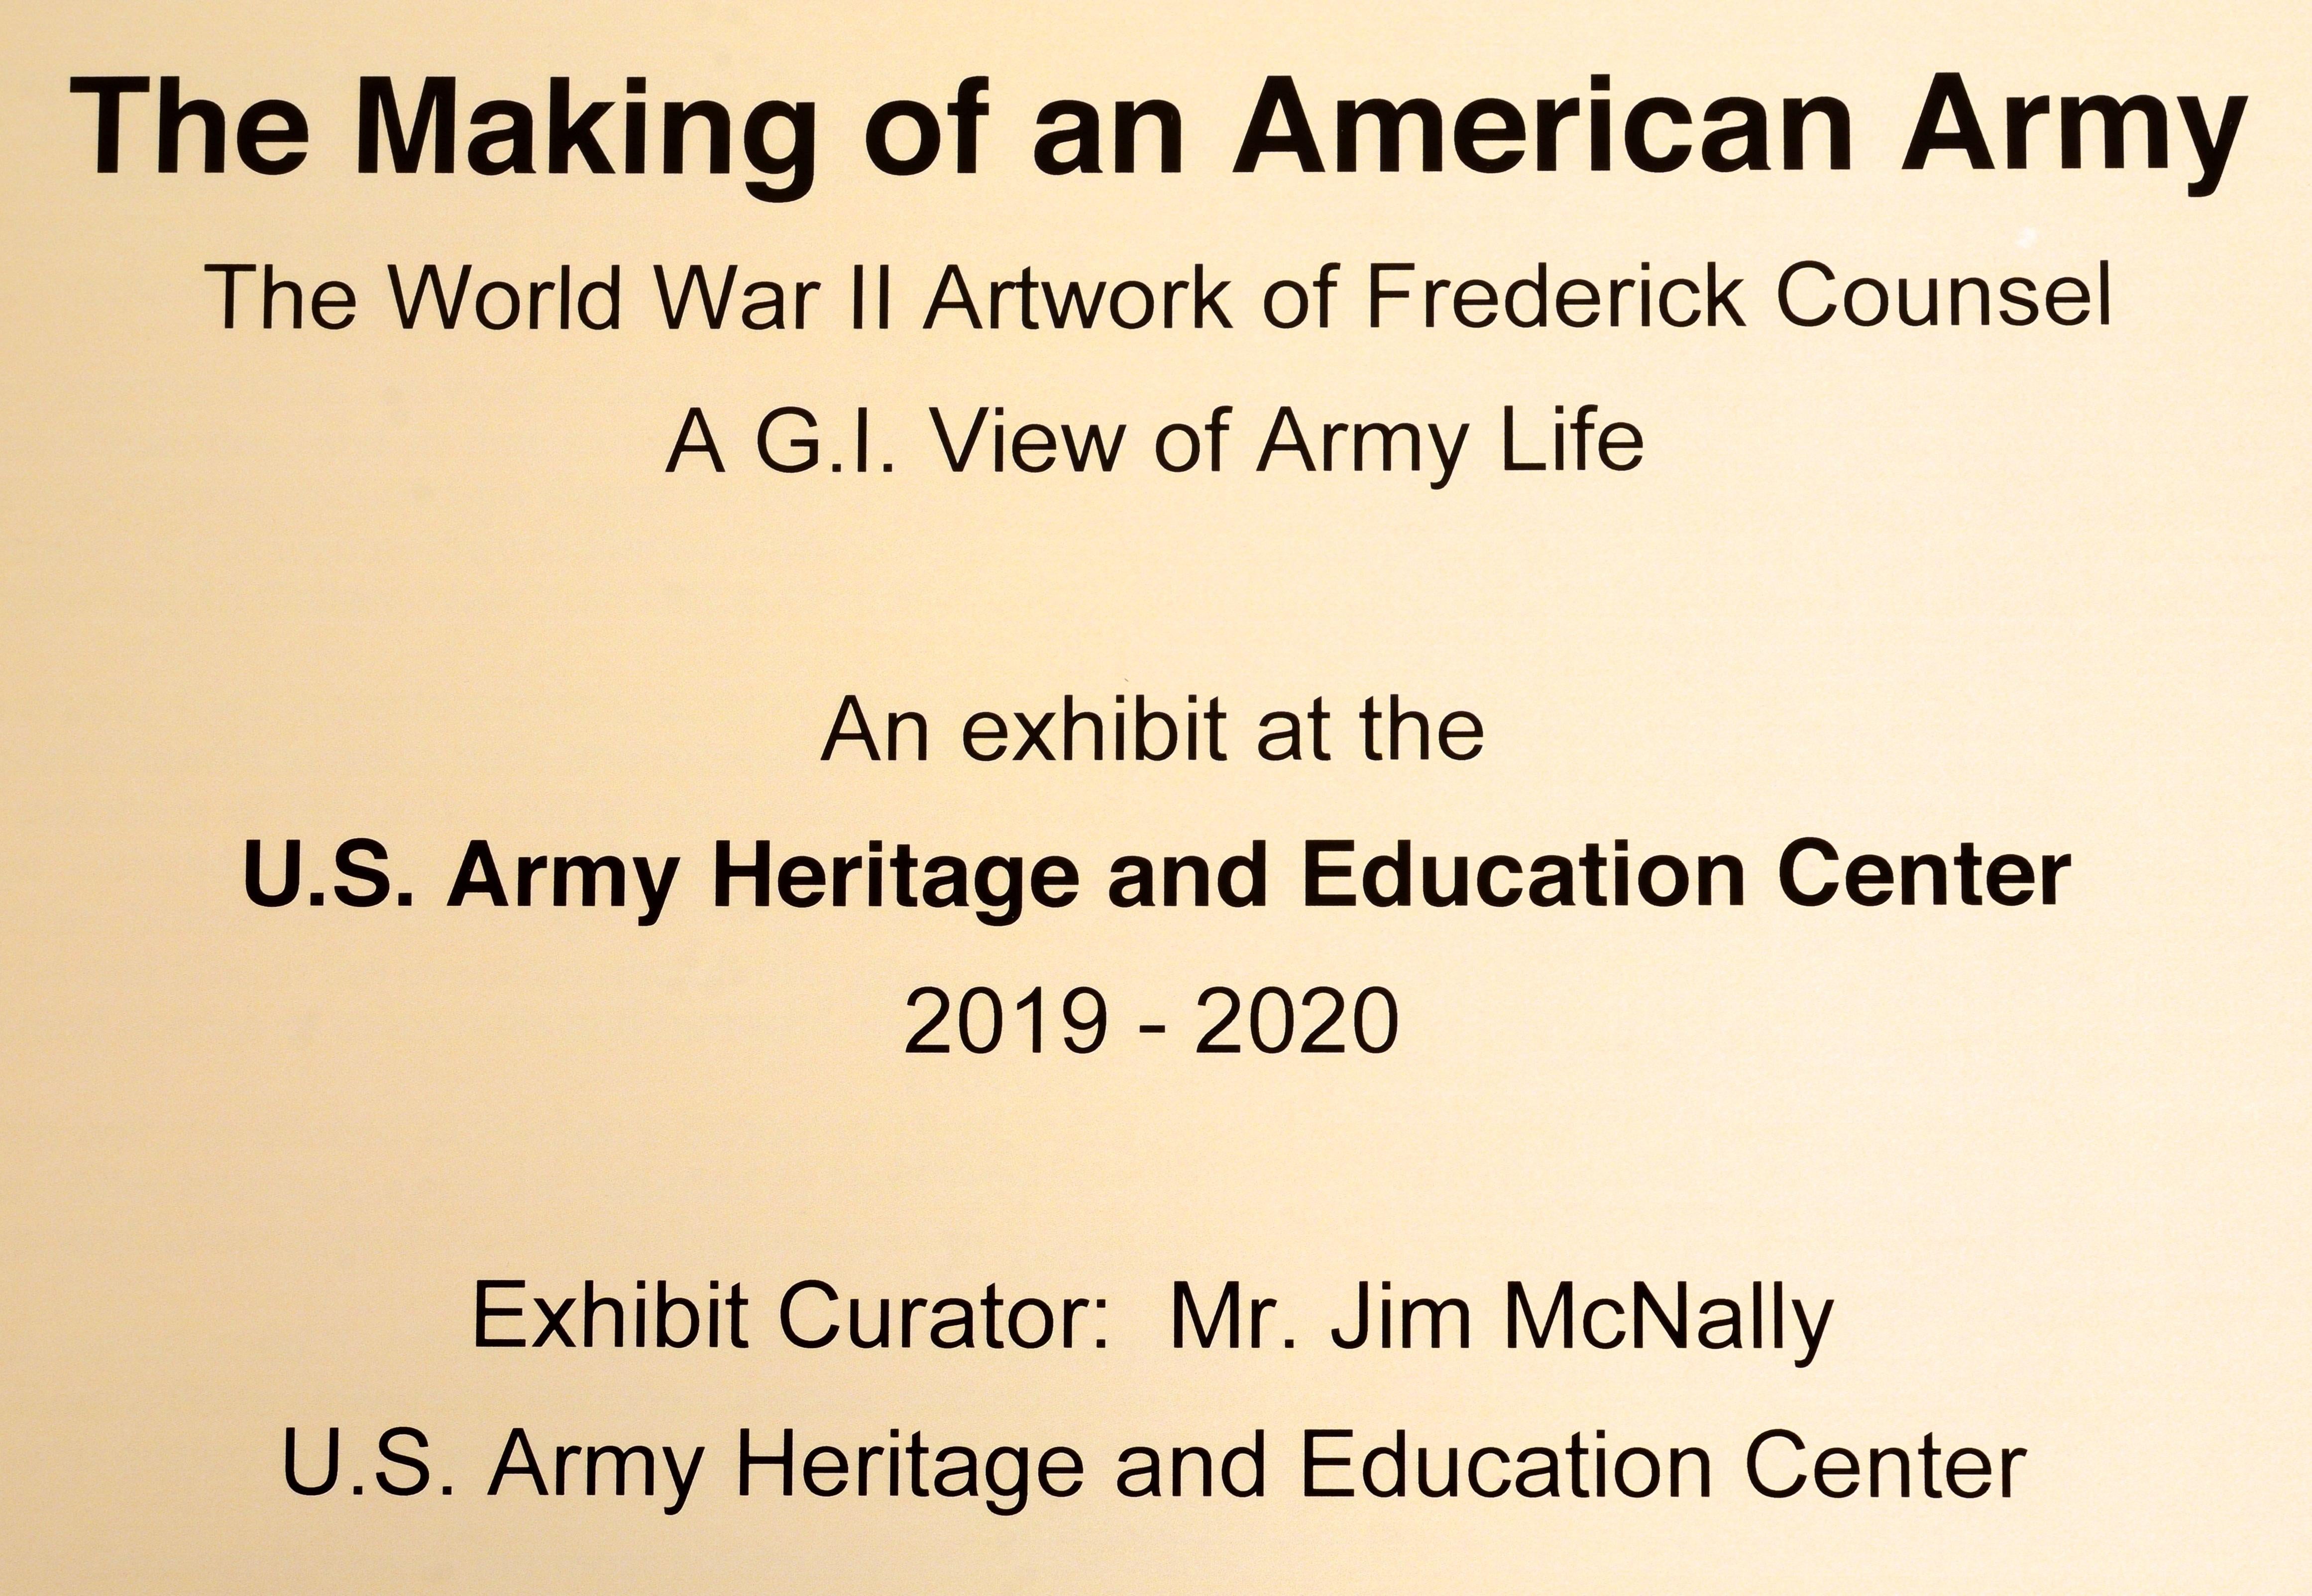 The Making of an American Army: The World War II Artwork of Frederick Counsel (A G.I. View of Army Life) was an exhibit at the U.S. Army Heritage and Education Center from 2019-2020. 1st Ed softcover. Frederick Counsel’s art book features many